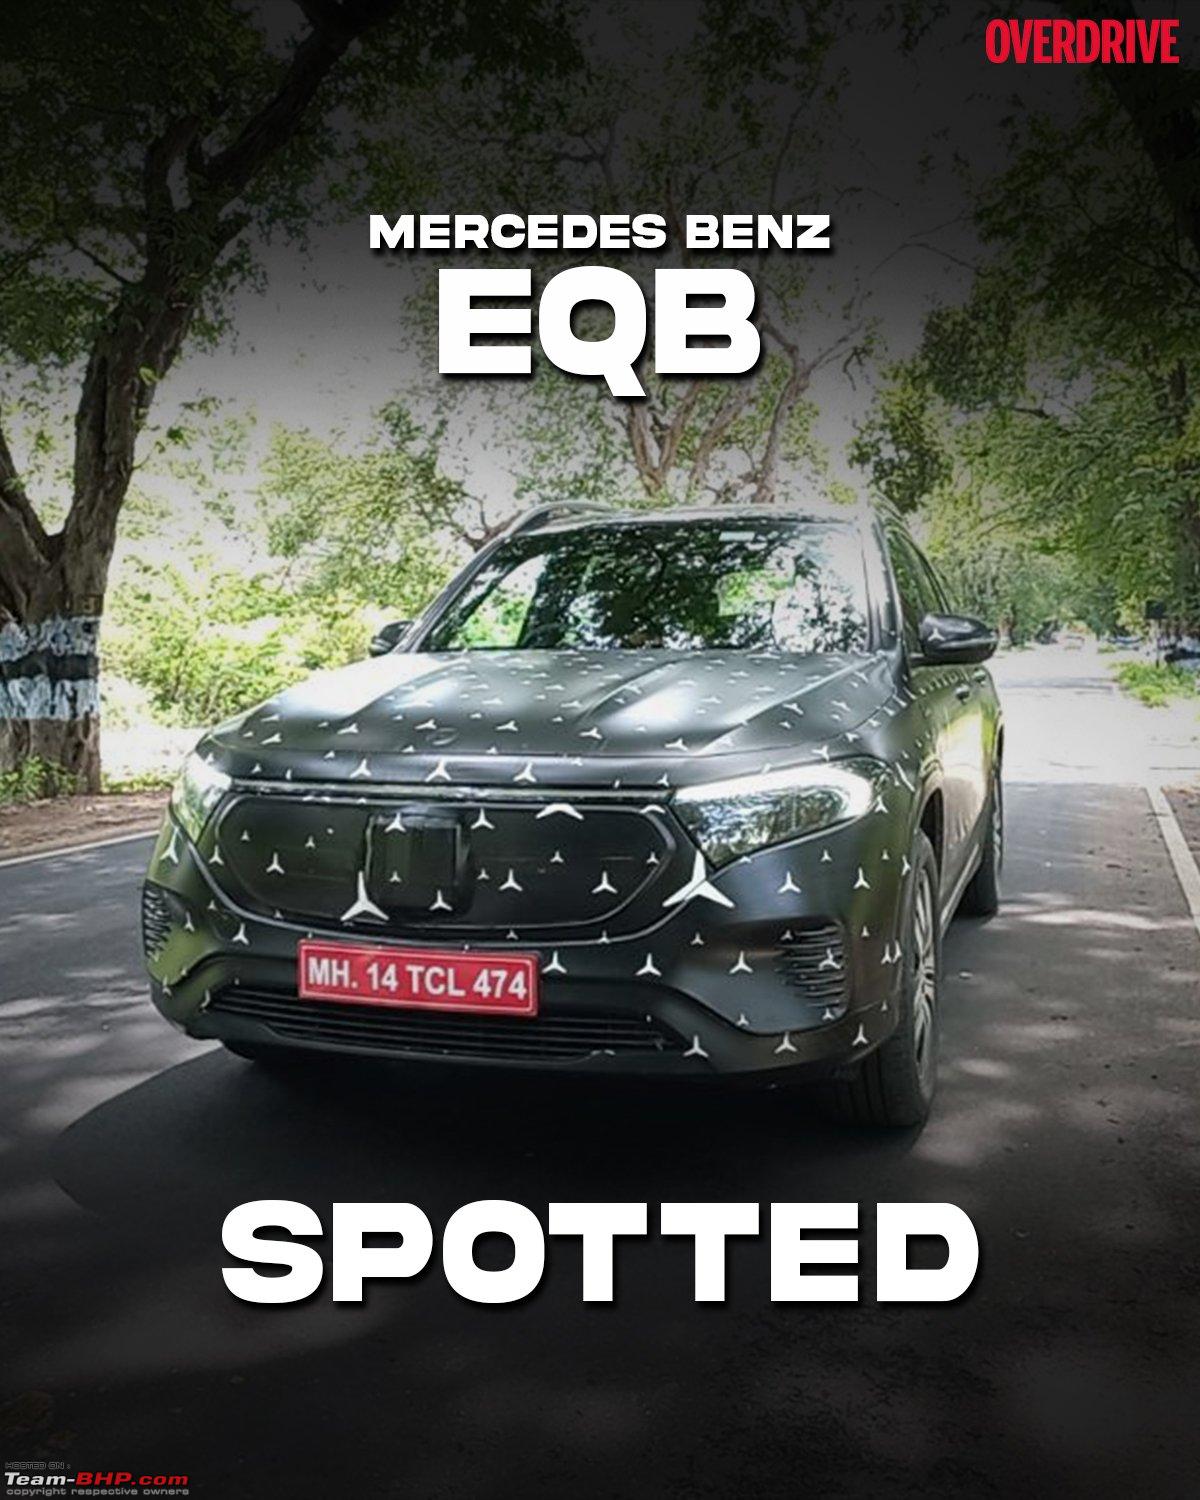 Mercedes-Benz GLB Vs EQB: What's different? - Overdrive